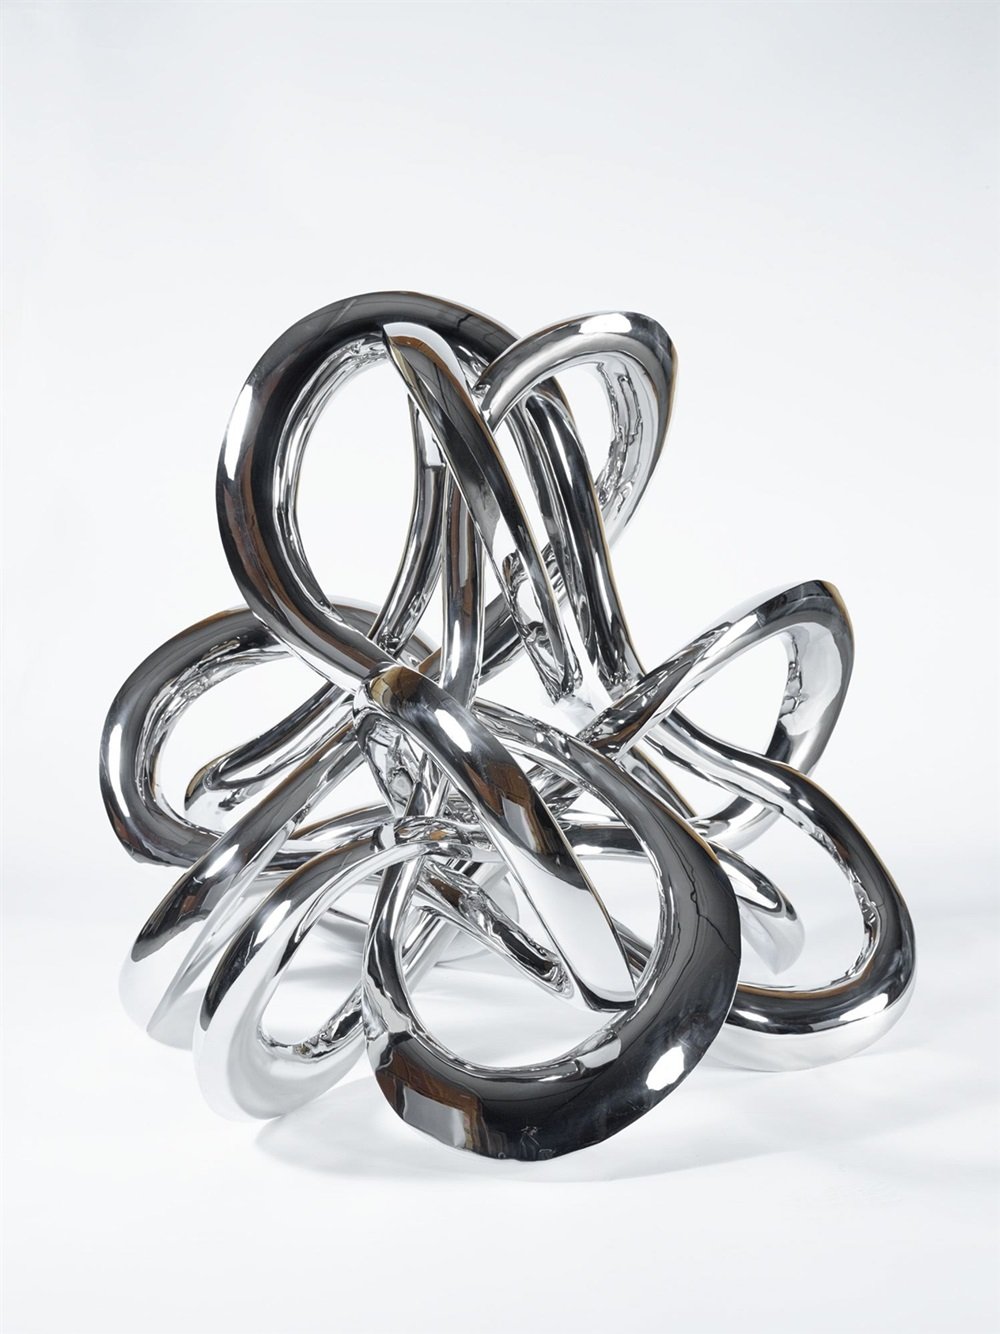 Saint Clair Cemin Rollercoaster 2014 stainless steel 61 x 61 x 57 1/2 inches; 154.9 x 154.9 x 146.1 cm Edition of 3 Image courtesy of the artist and Paul Kasmin Gallery. 